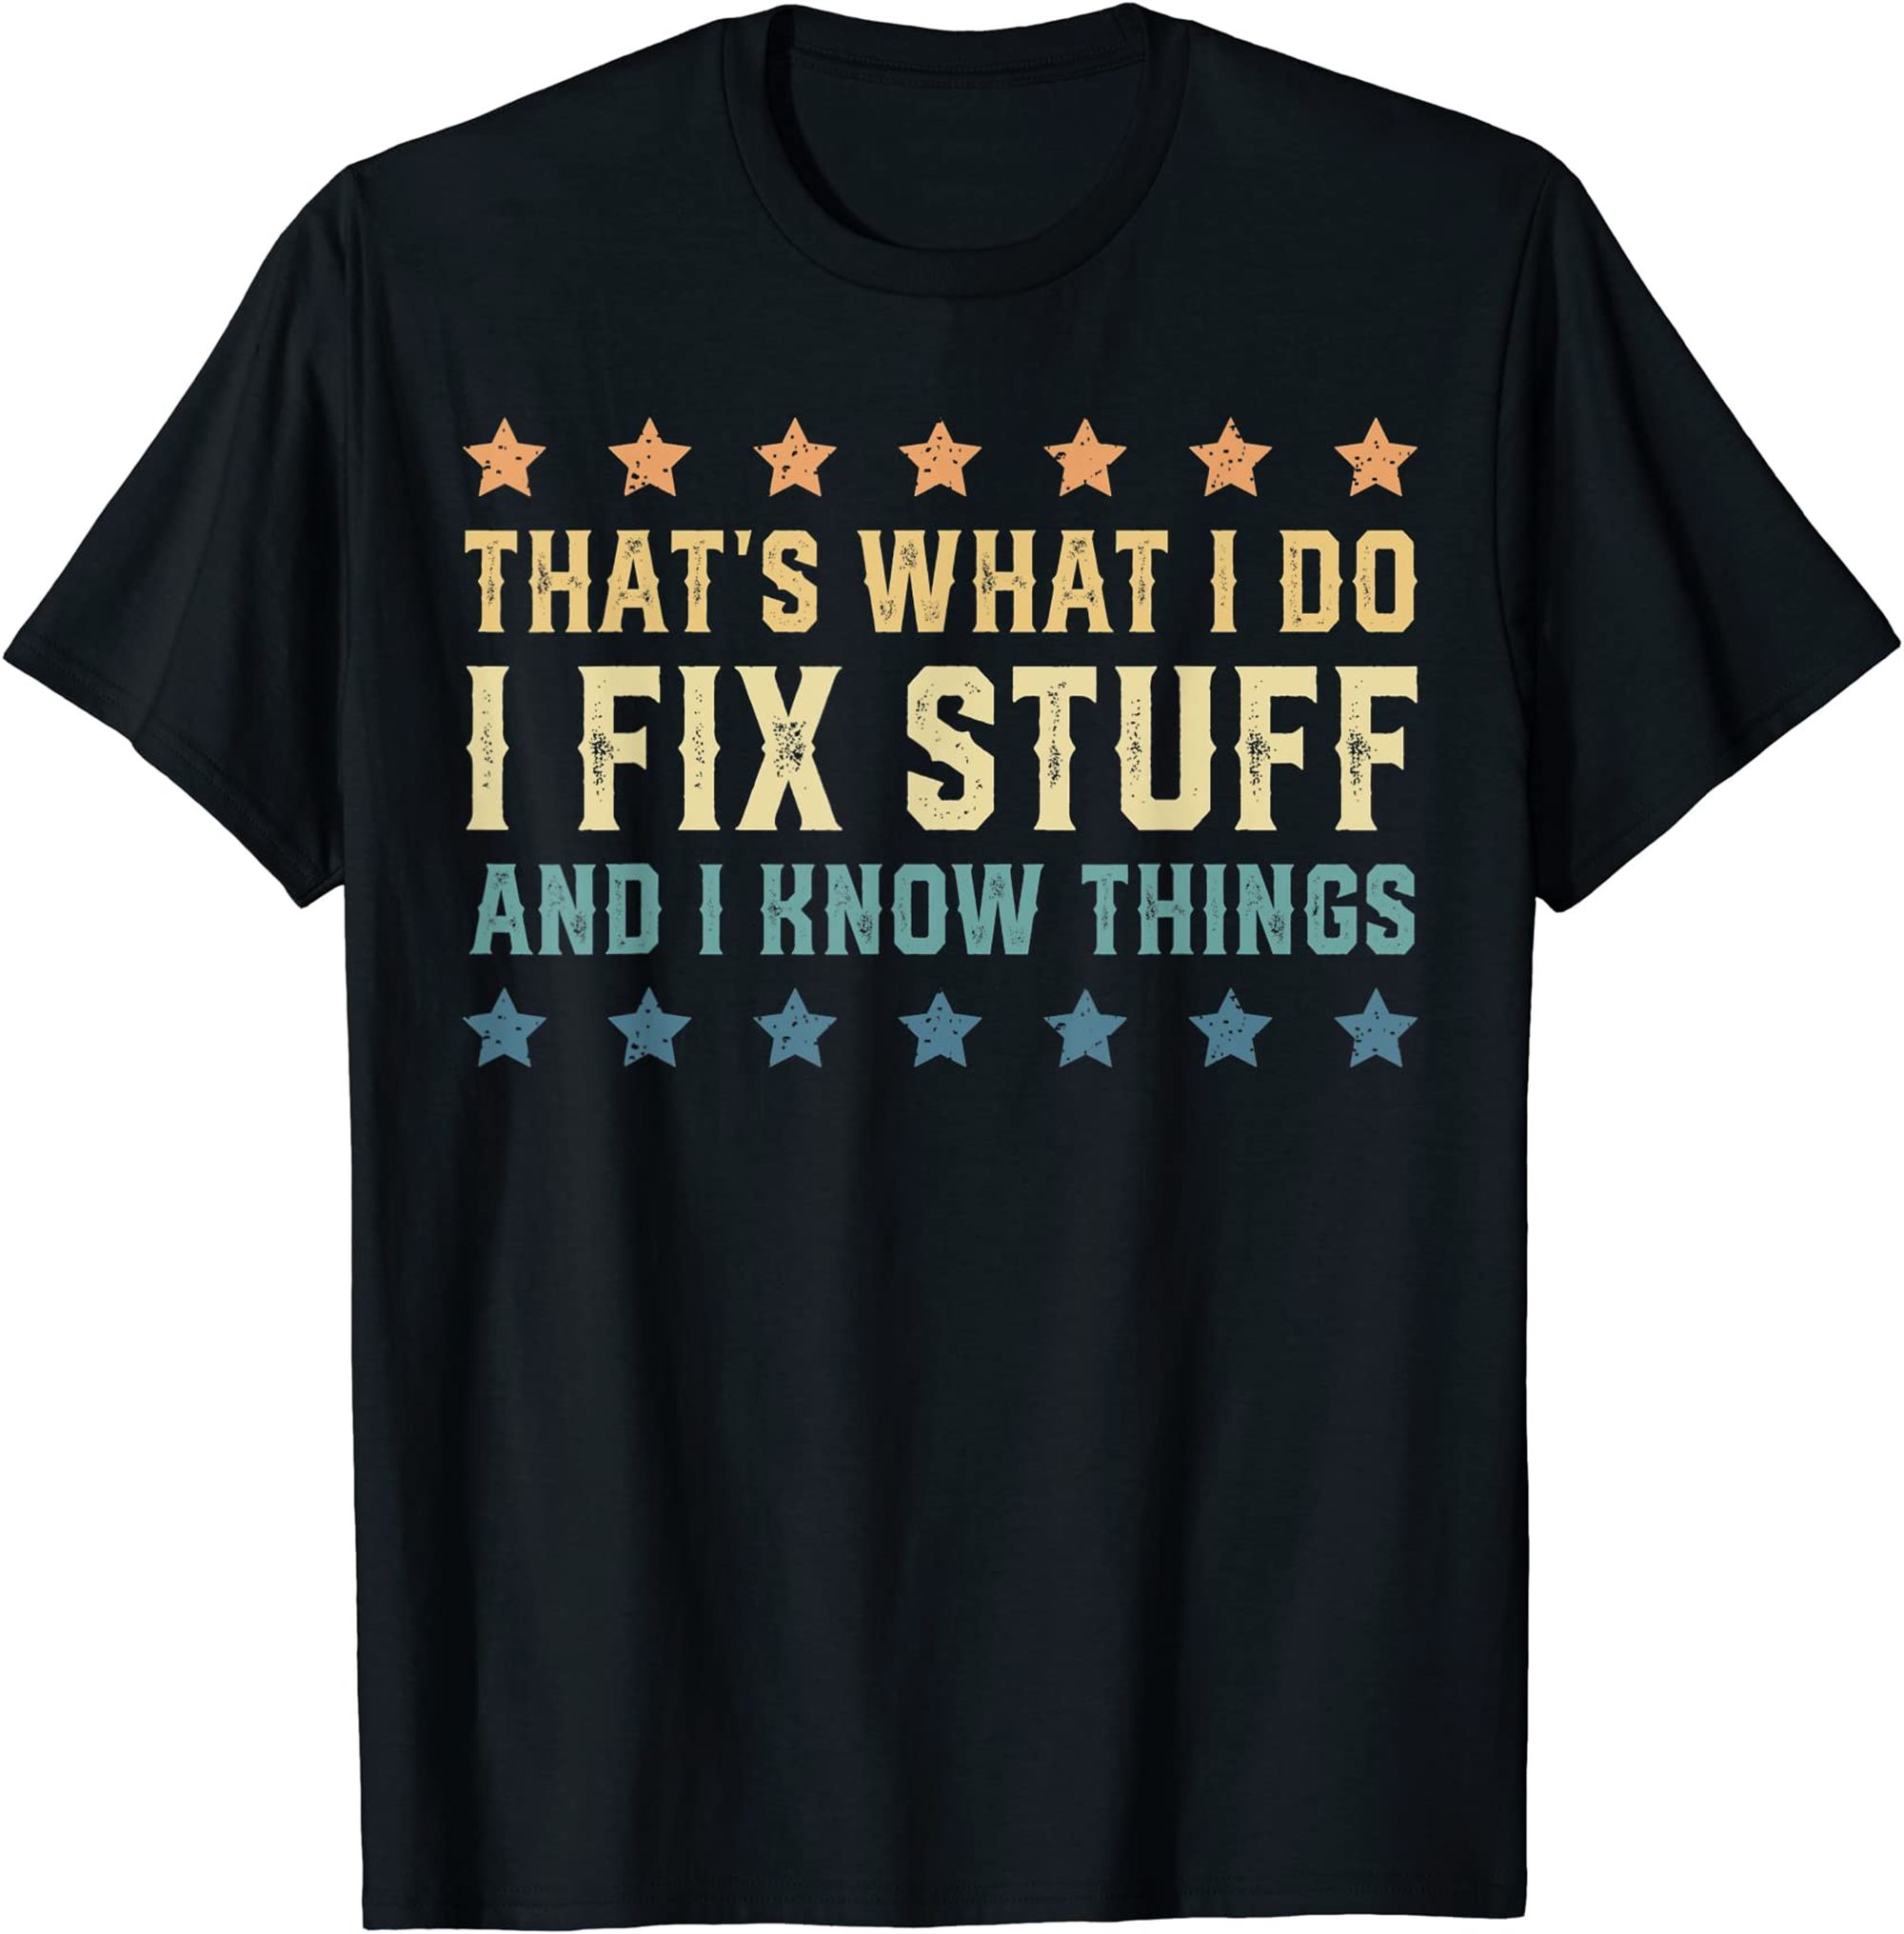 Thats What I Do I Fix Stuff And I Know Things T-shirt Size Up To 5xl ...